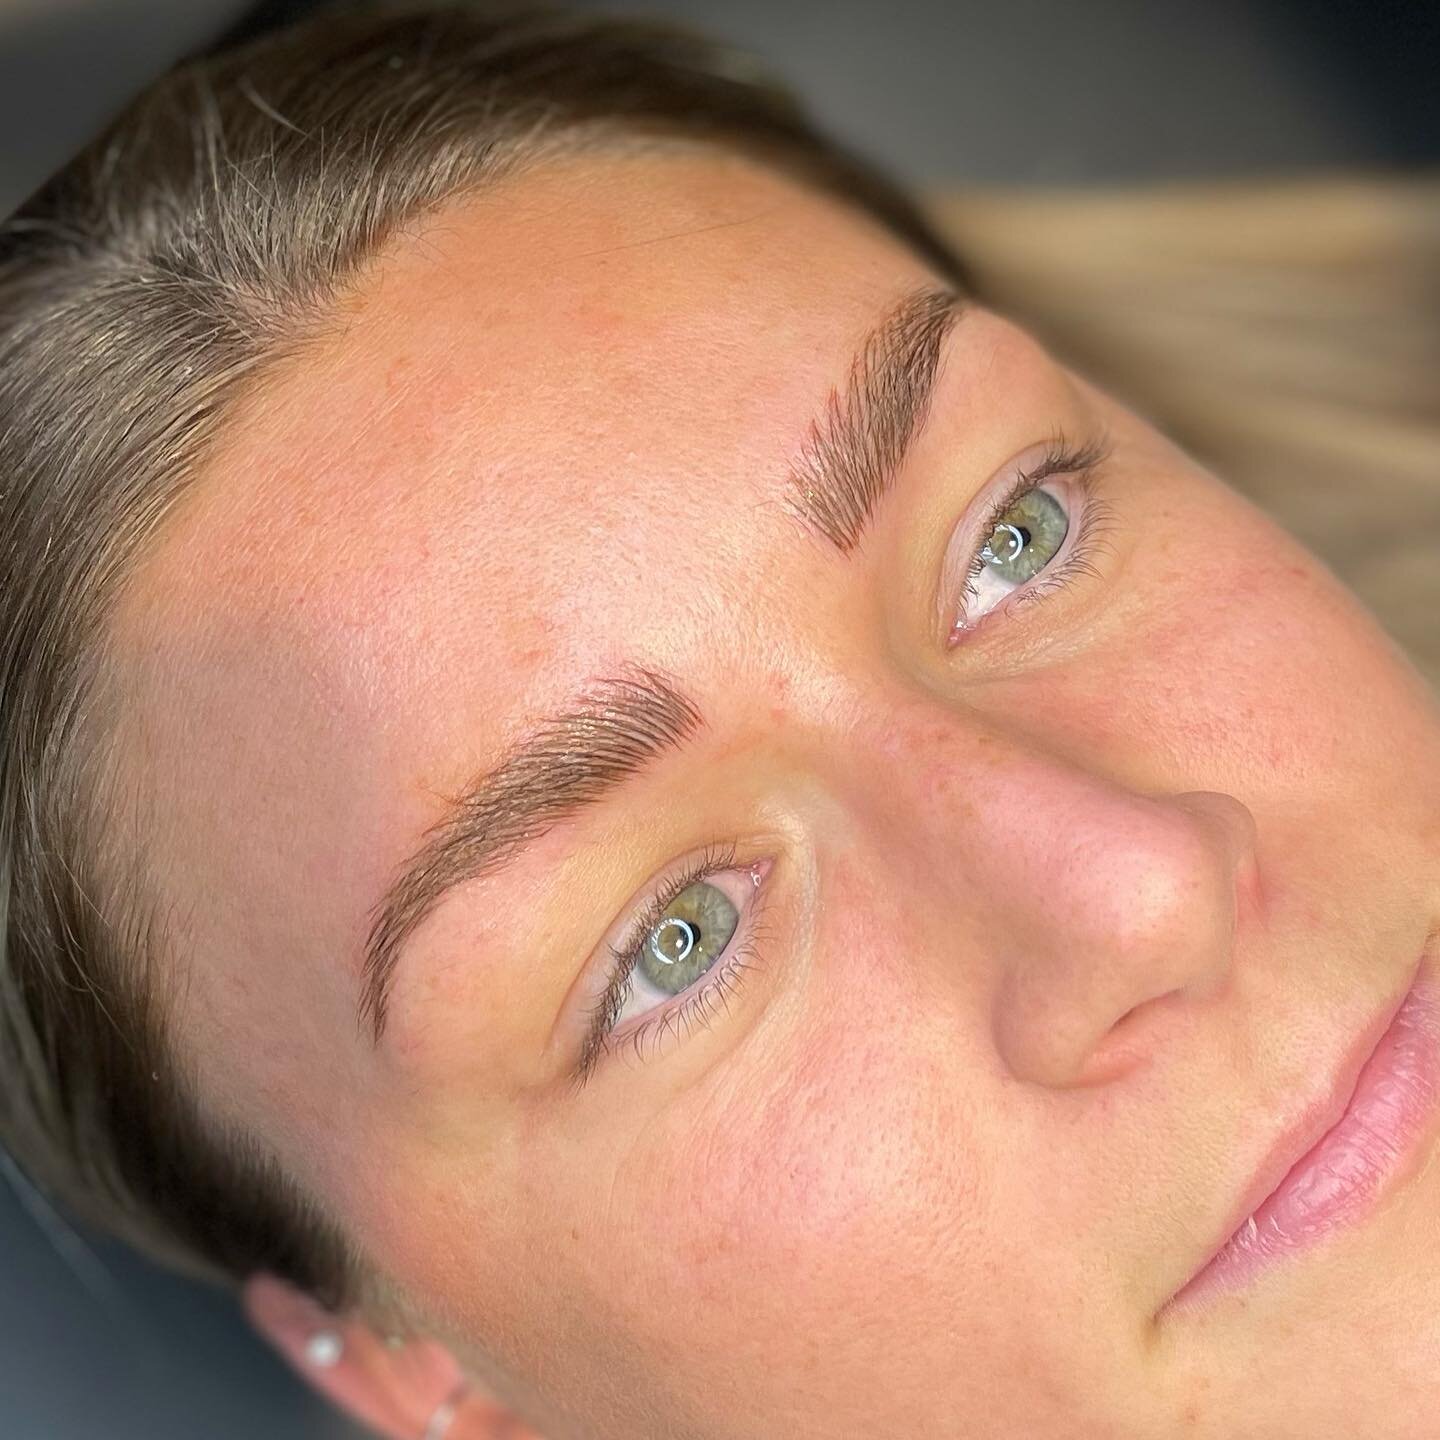 One of my favourite brow sets to date:) #kelownamicroblading #microblading #ylw #smallbusiness #permanentmakeupartist